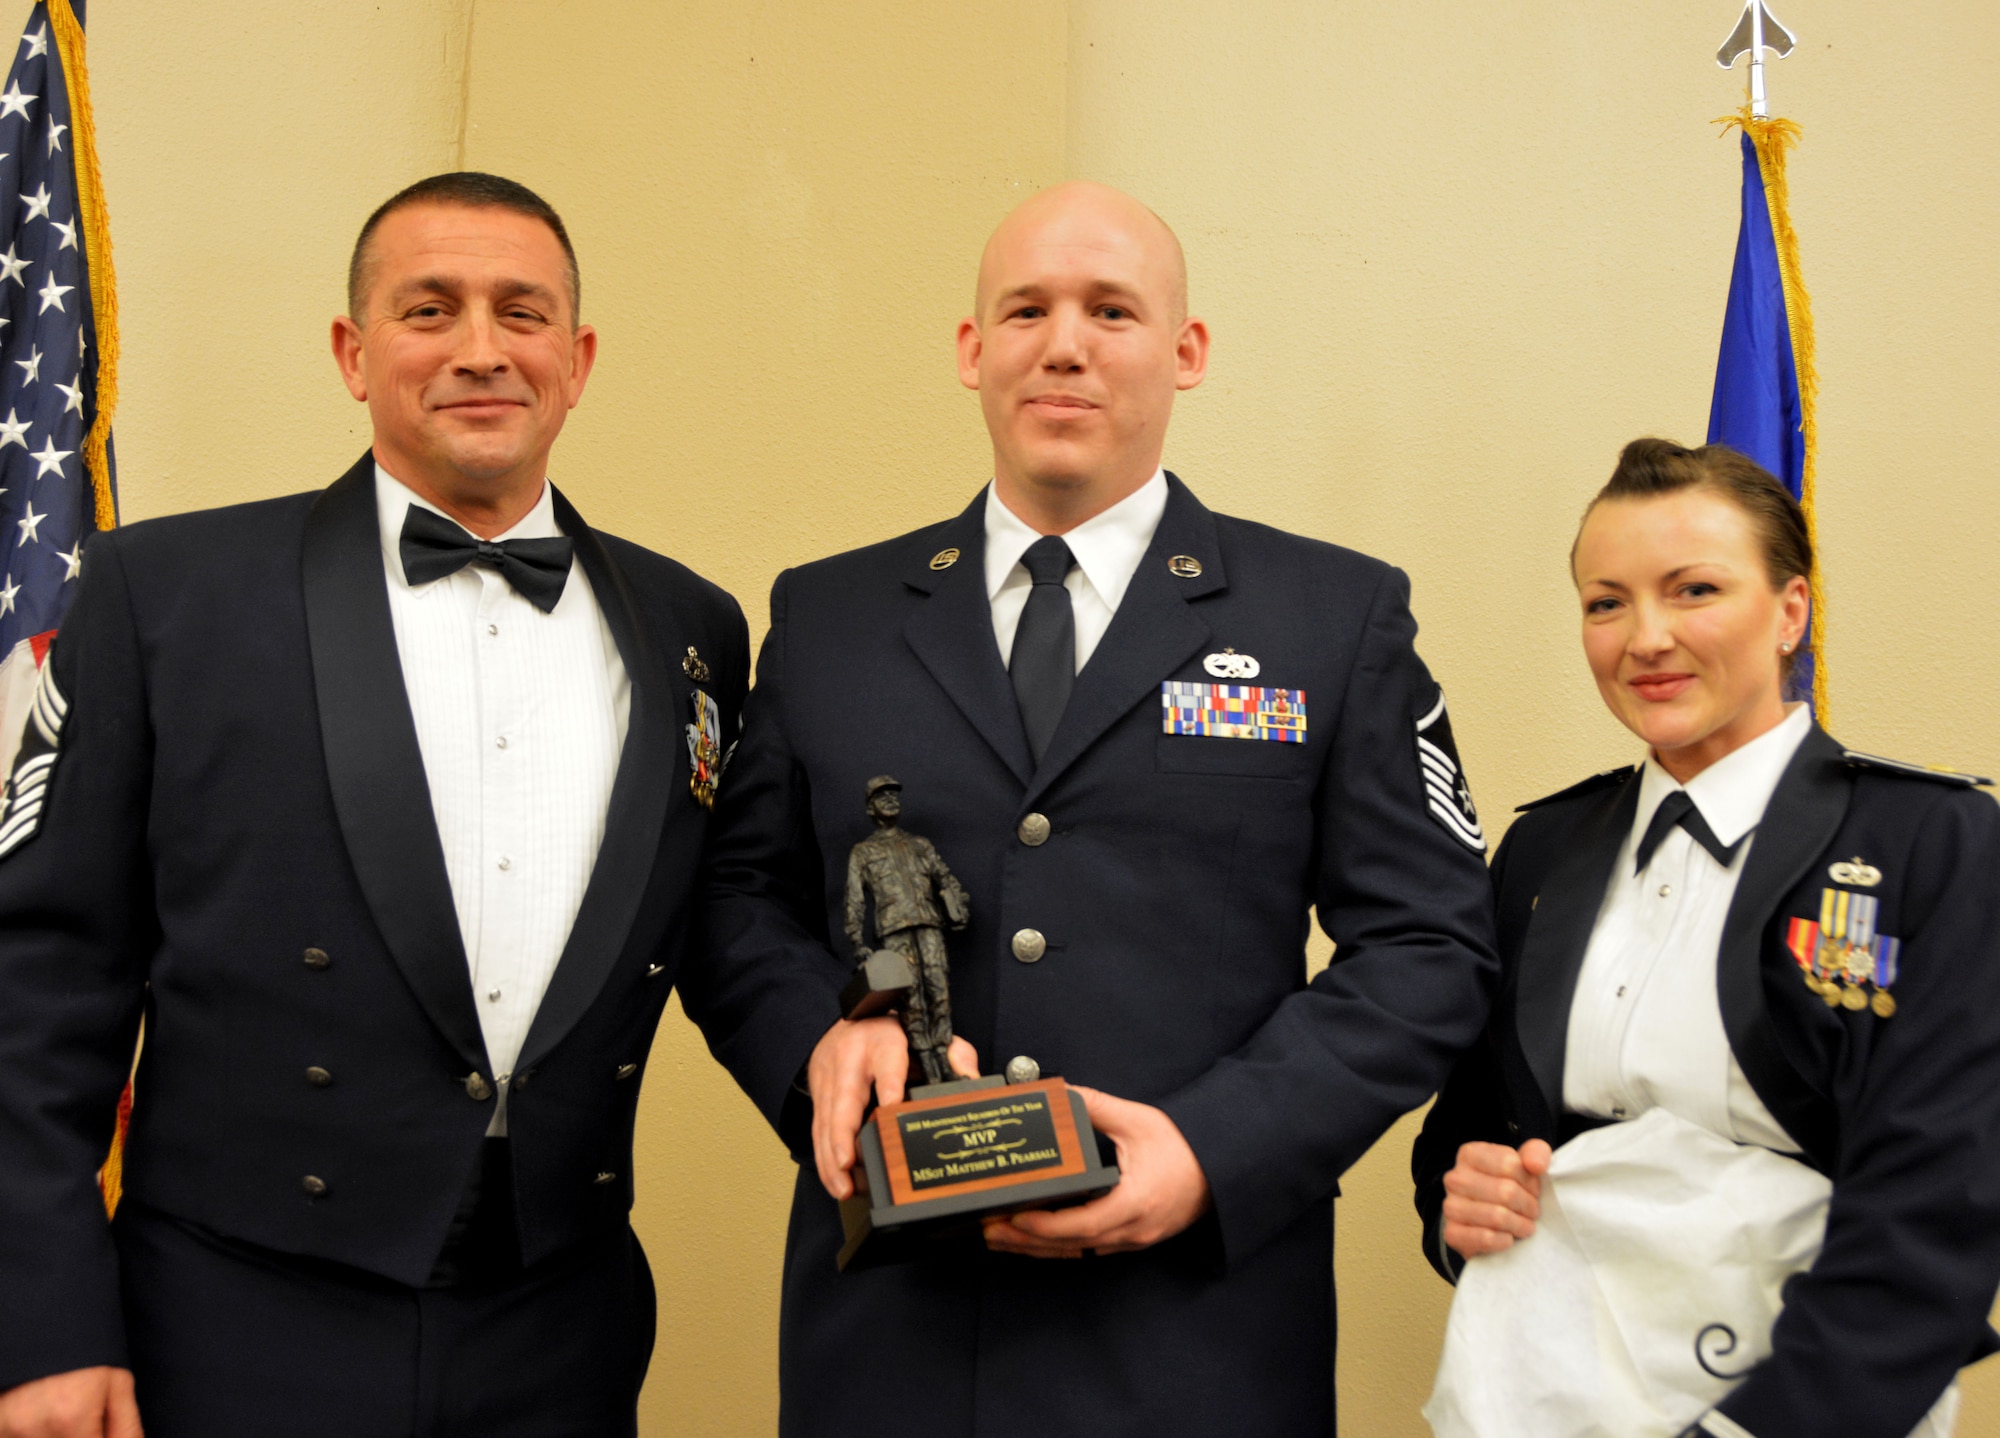 Chief Master Sgt. Richard Stull, 507th Maintenance Squadron superintendent, and Maj. Melissa Jones, 507th MXS commander, present the 2018 507th Maintenance Squadron MVP of the Year award to Master Sgt. Matthew Pearsall, March 2, 2019, in Midwest City, Oklahoma. (U.S. Air Force photo by Maj. Jon Quinlan)